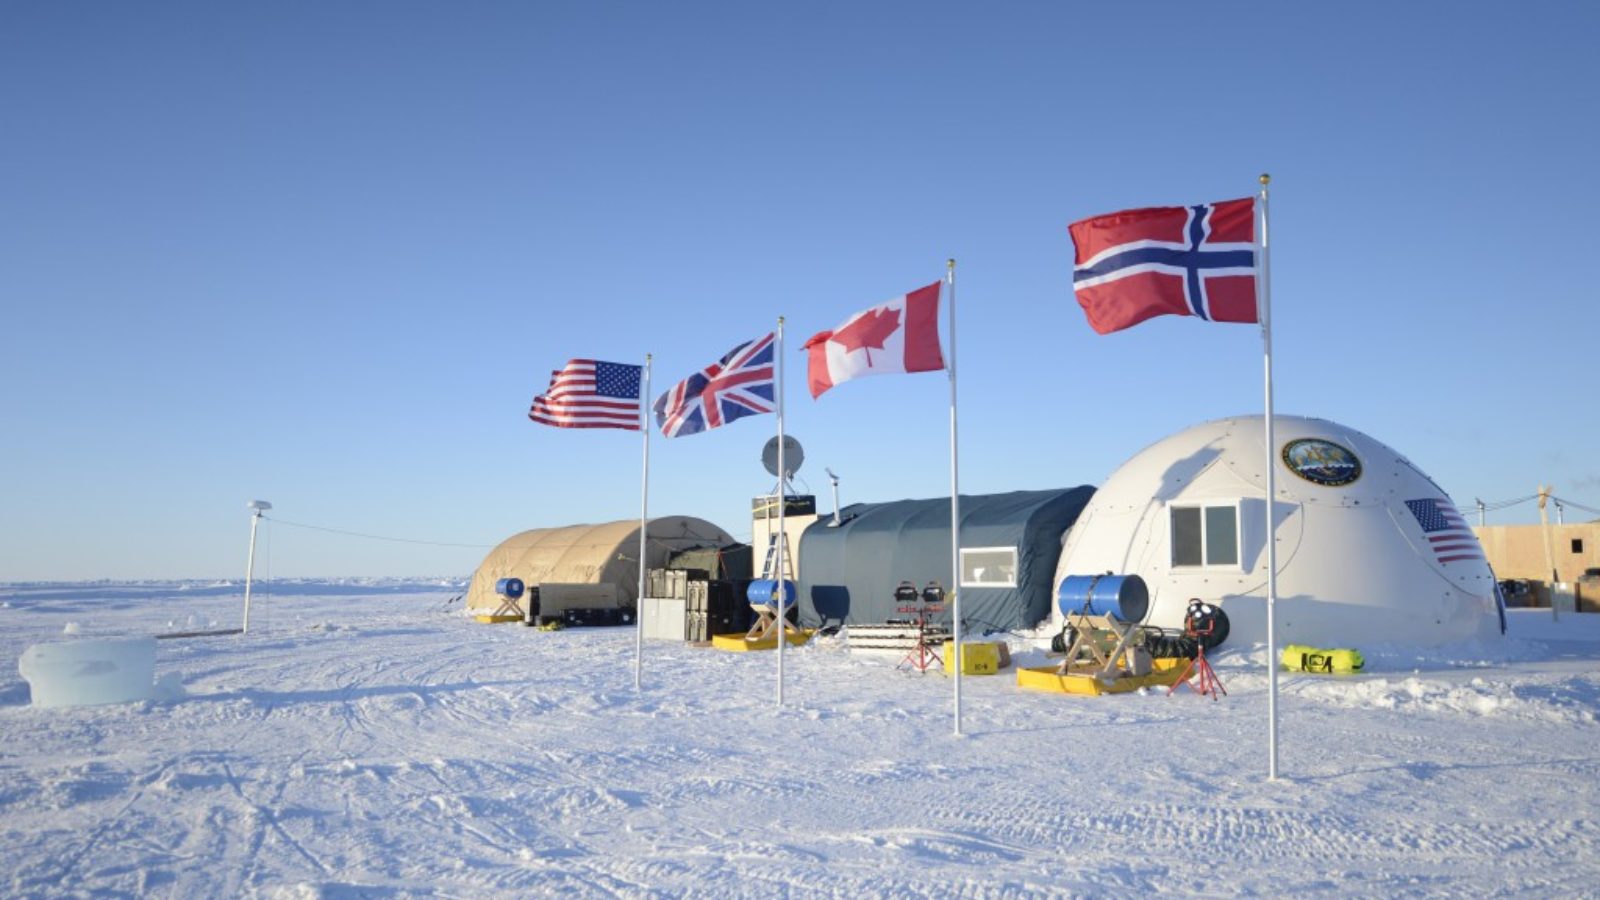 The flags of the U.S., the UK, Norway, and Canada are planted next to each other in the ice outside of a research station in the Arctic.